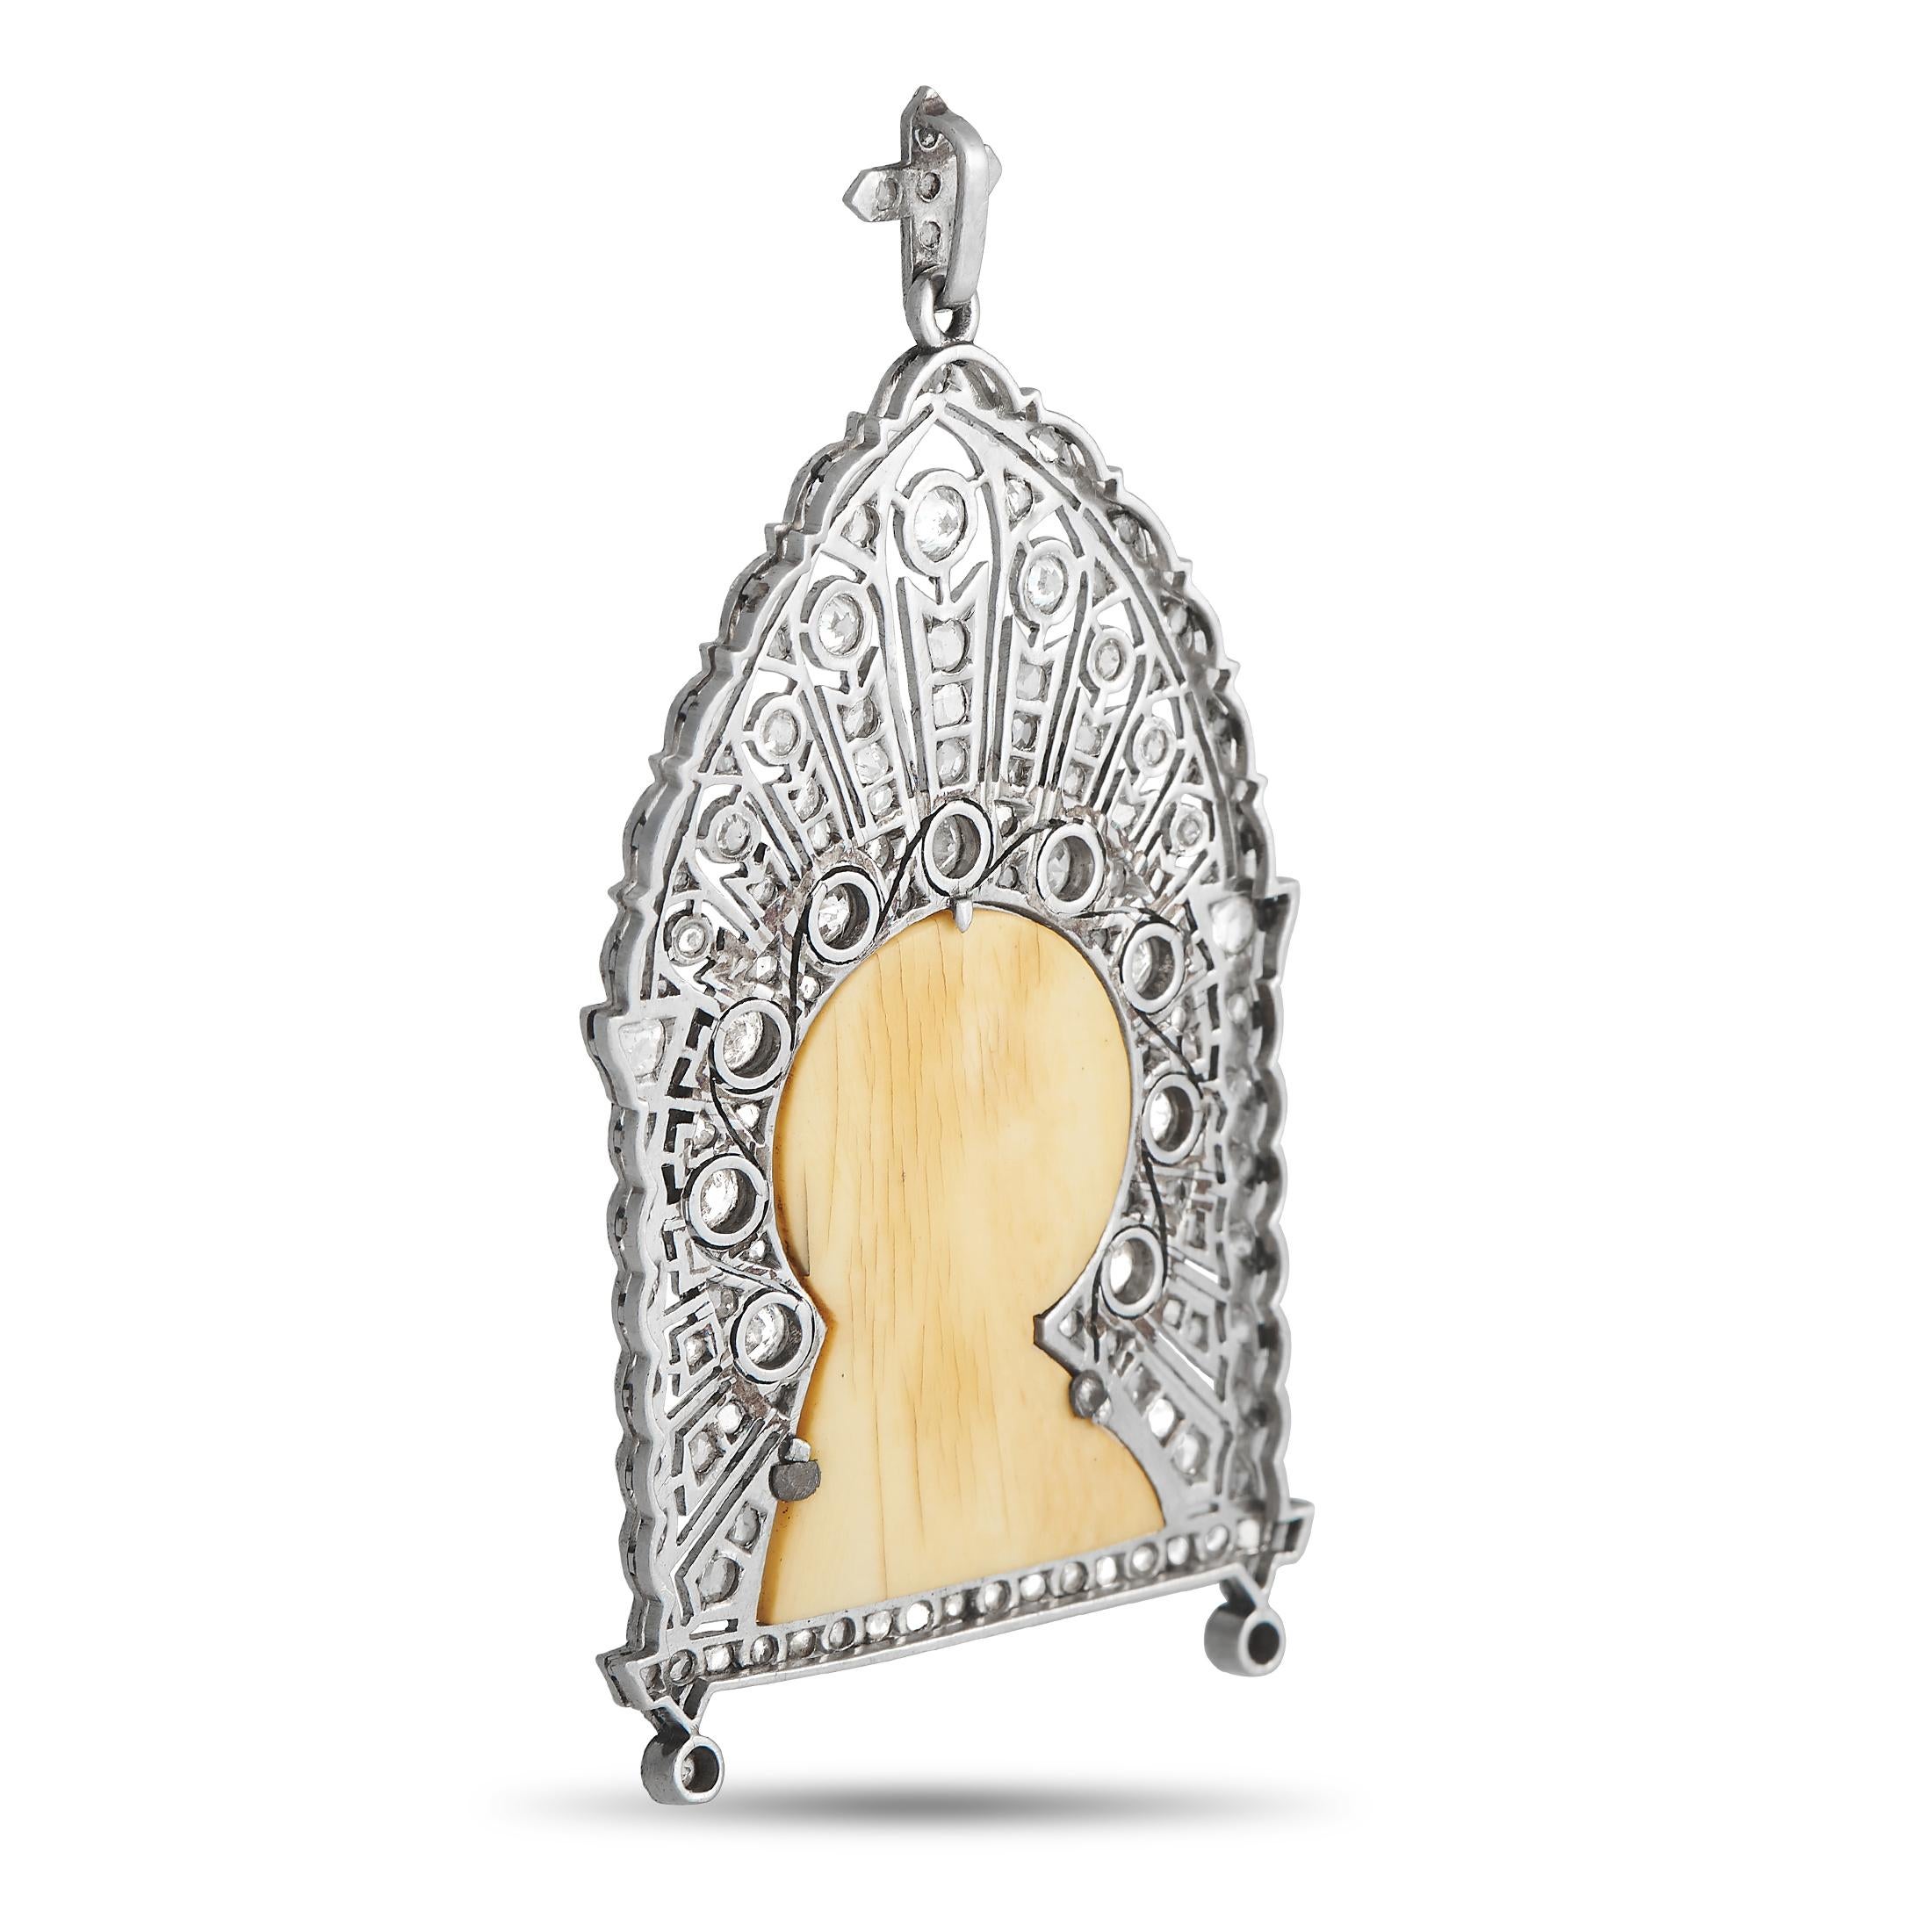 A special antique jewel to add to your or your loved one's collection. This platinum pendant features a St. Mary cameo carved from a white hard stone. It is set within an intricately crafted platinum frame with milgrain detailing and a combination